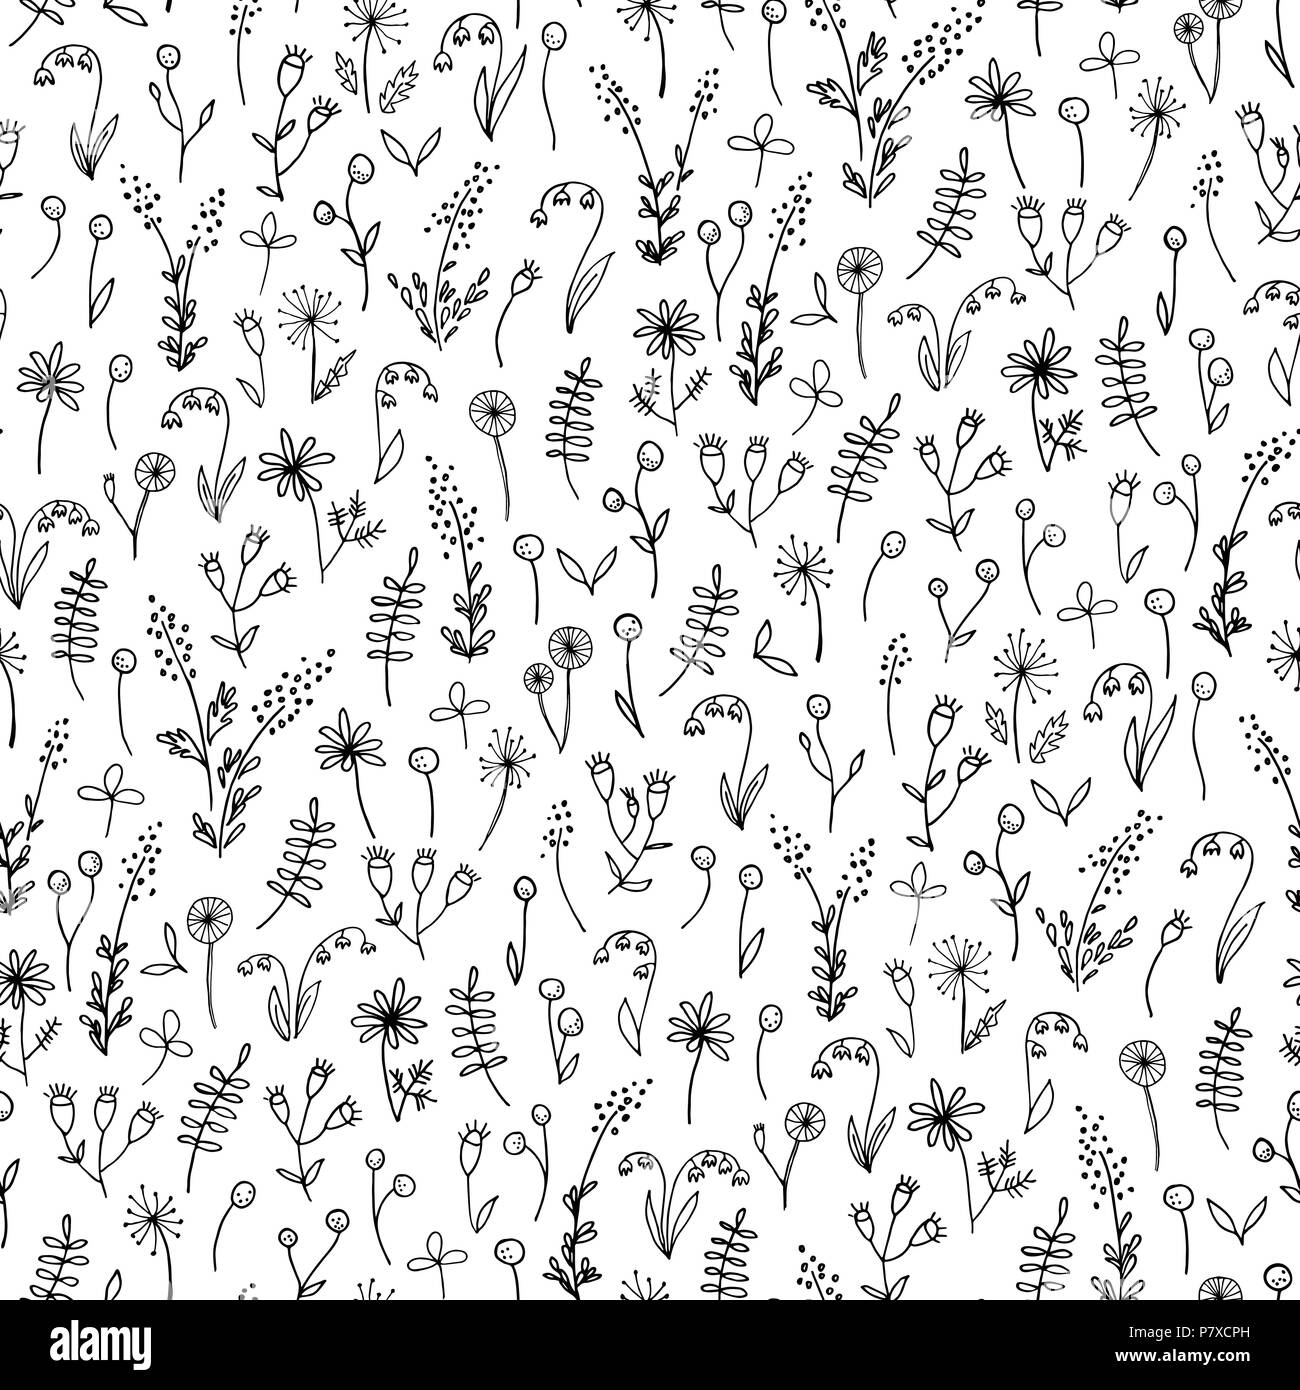 Black and White Hand Drawn Doodle Floral Vector Seamless Pattern ...